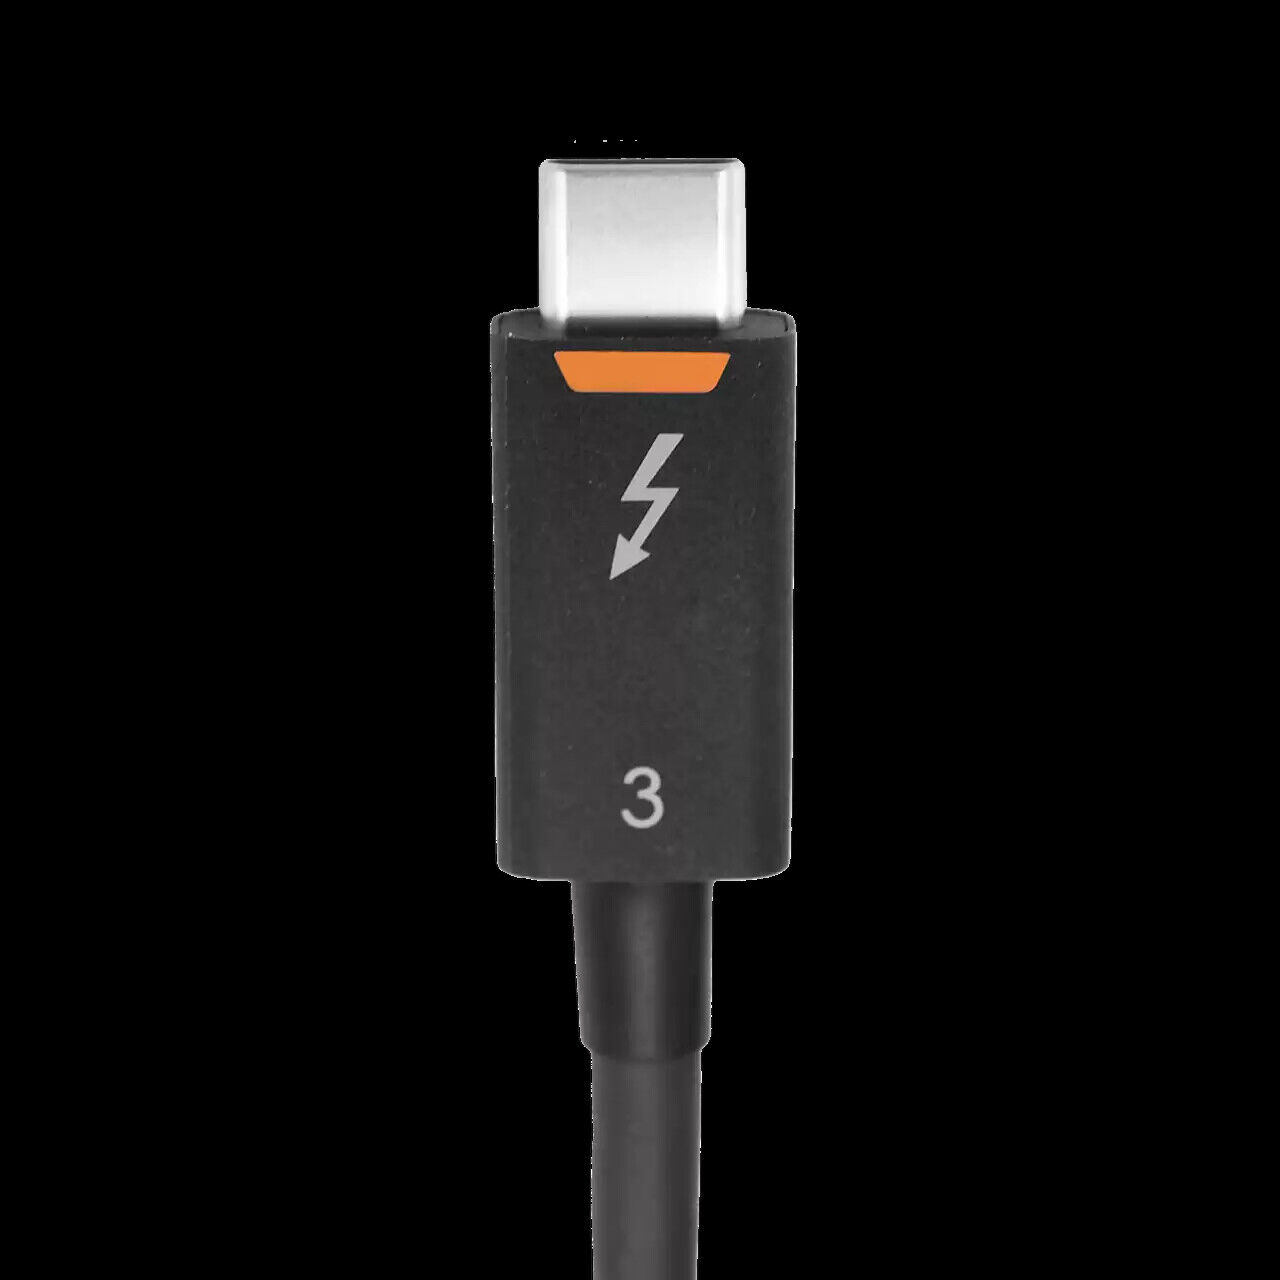 SanDisk High-Speed Speed Thunderbolt 3 40Gbps Cable, 2.6FT - SDPA7NF-0000-GBR2B